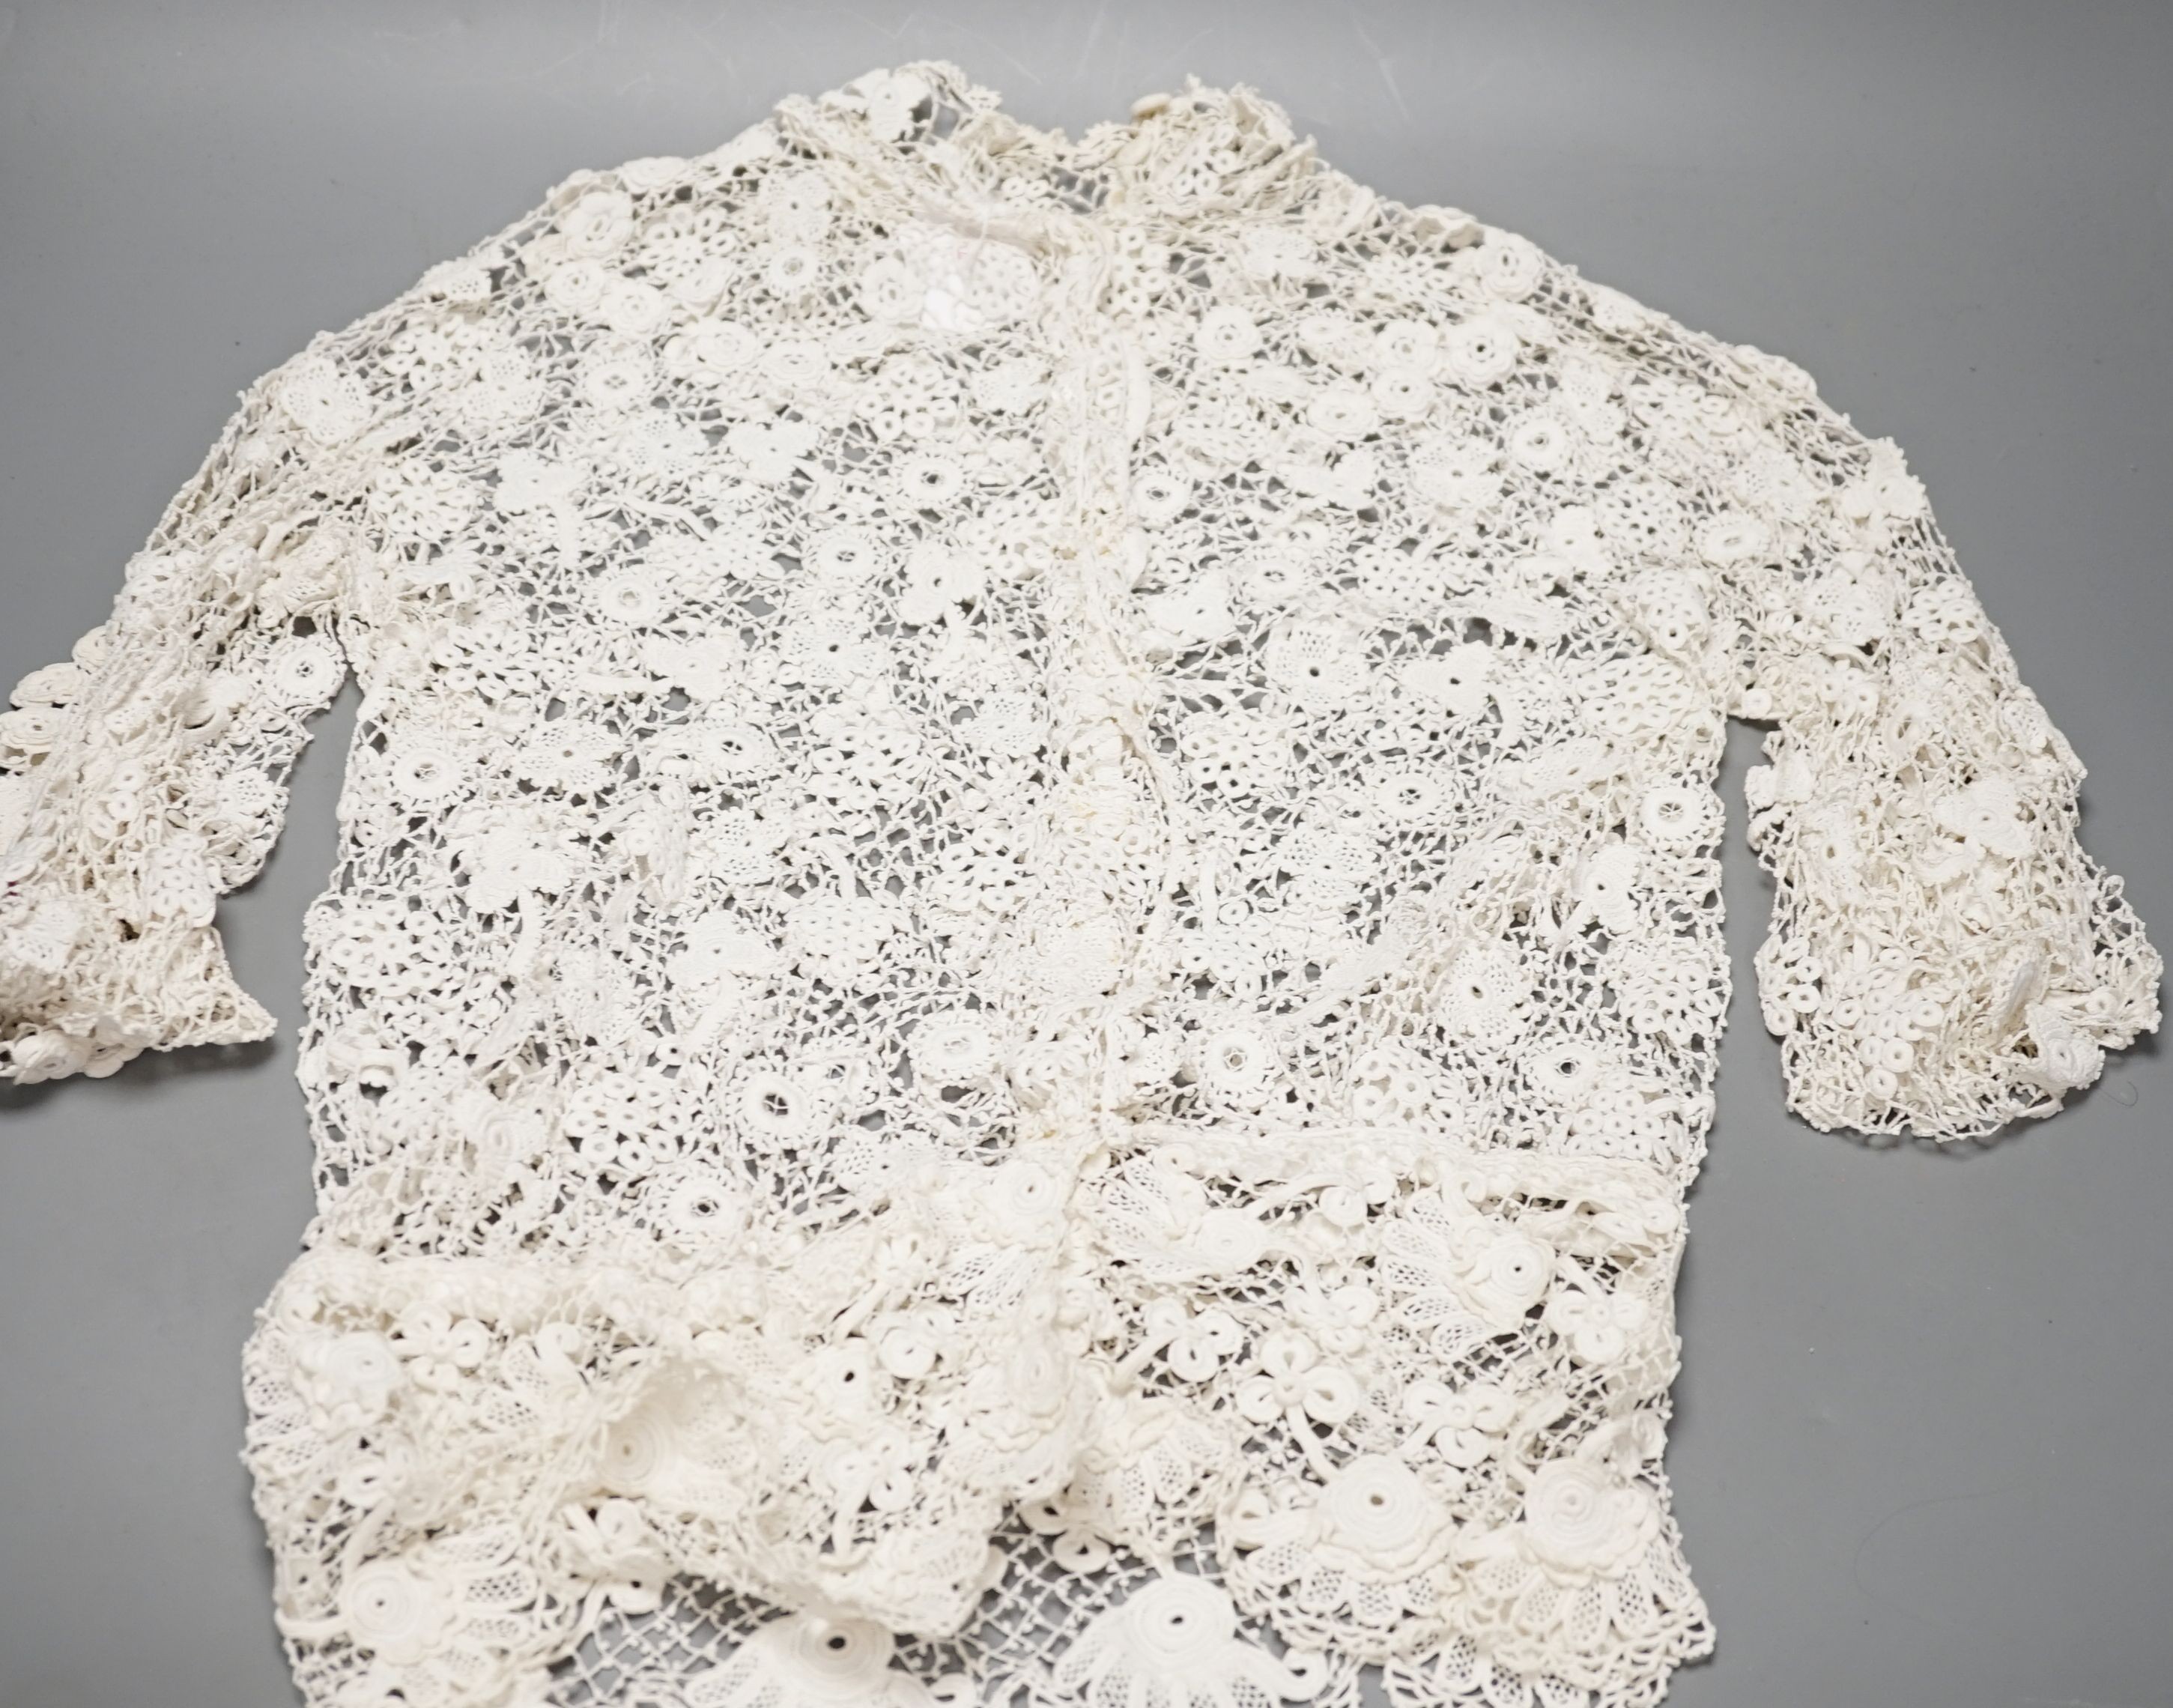 A 19th century hand made Irish crochet jacket, with long sleeves and high collar, a bobbin lace and white worked patch worked blouse, a fine lawn and anglaise worked blouse and a fine bobbin lace trimmed and white worked